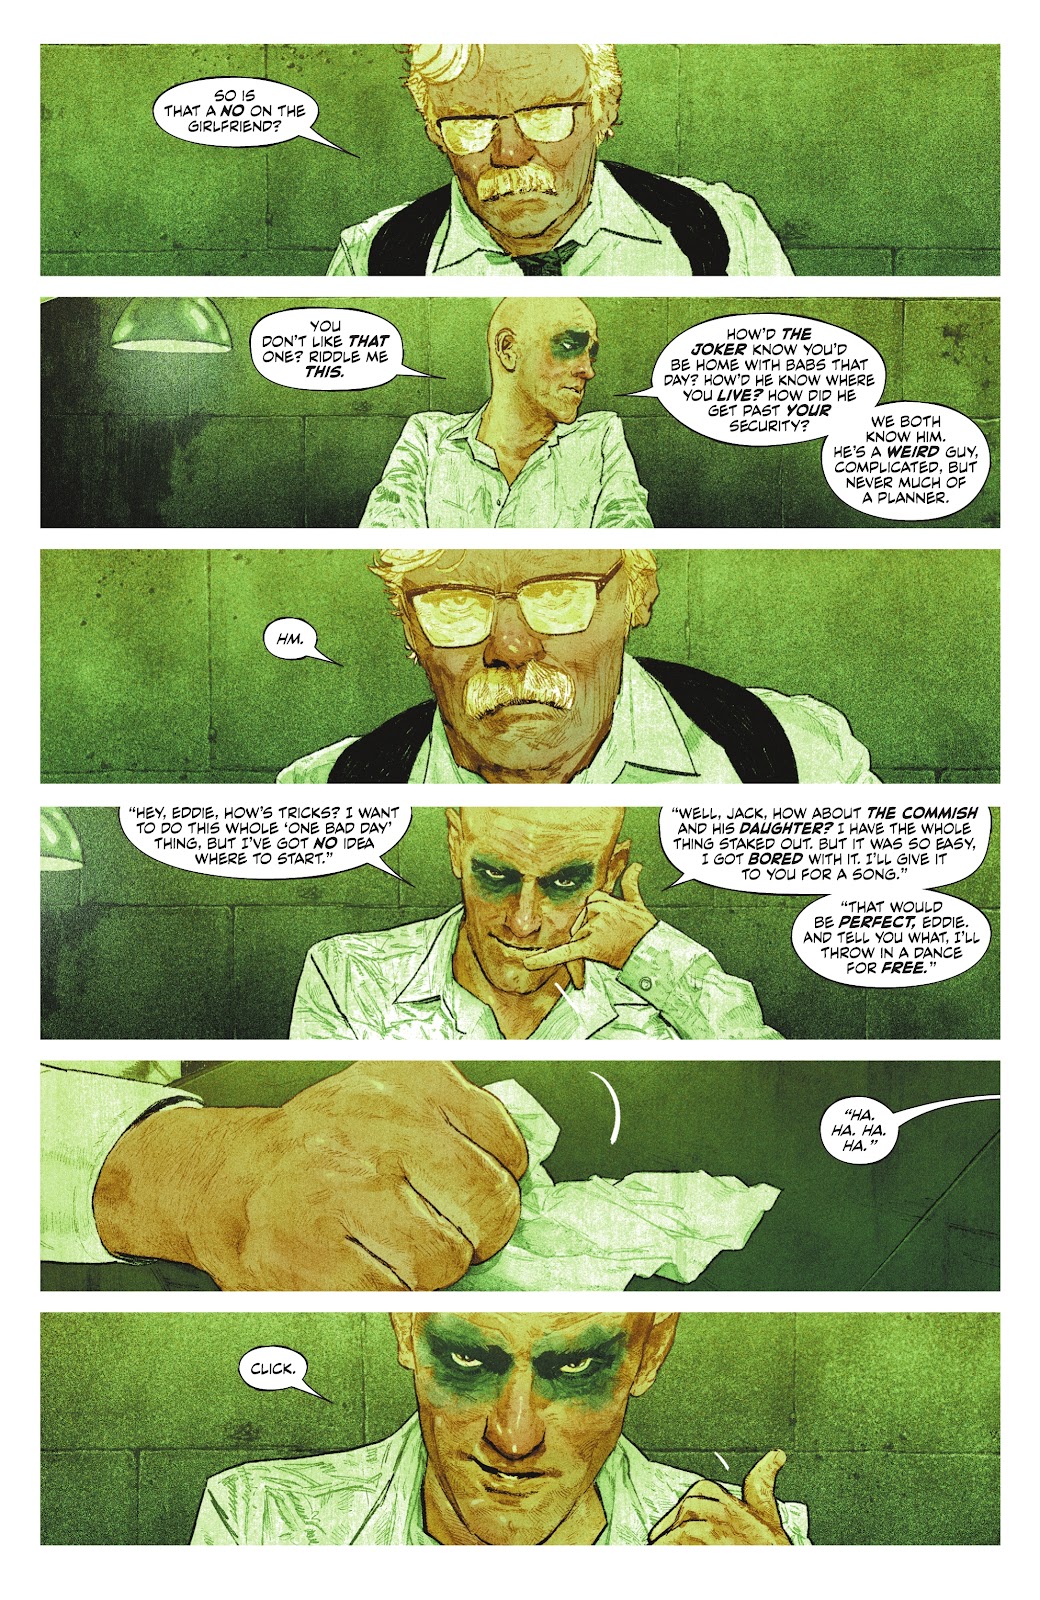 Batman: One Bad Day - The Riddler issue 1 - Page 9